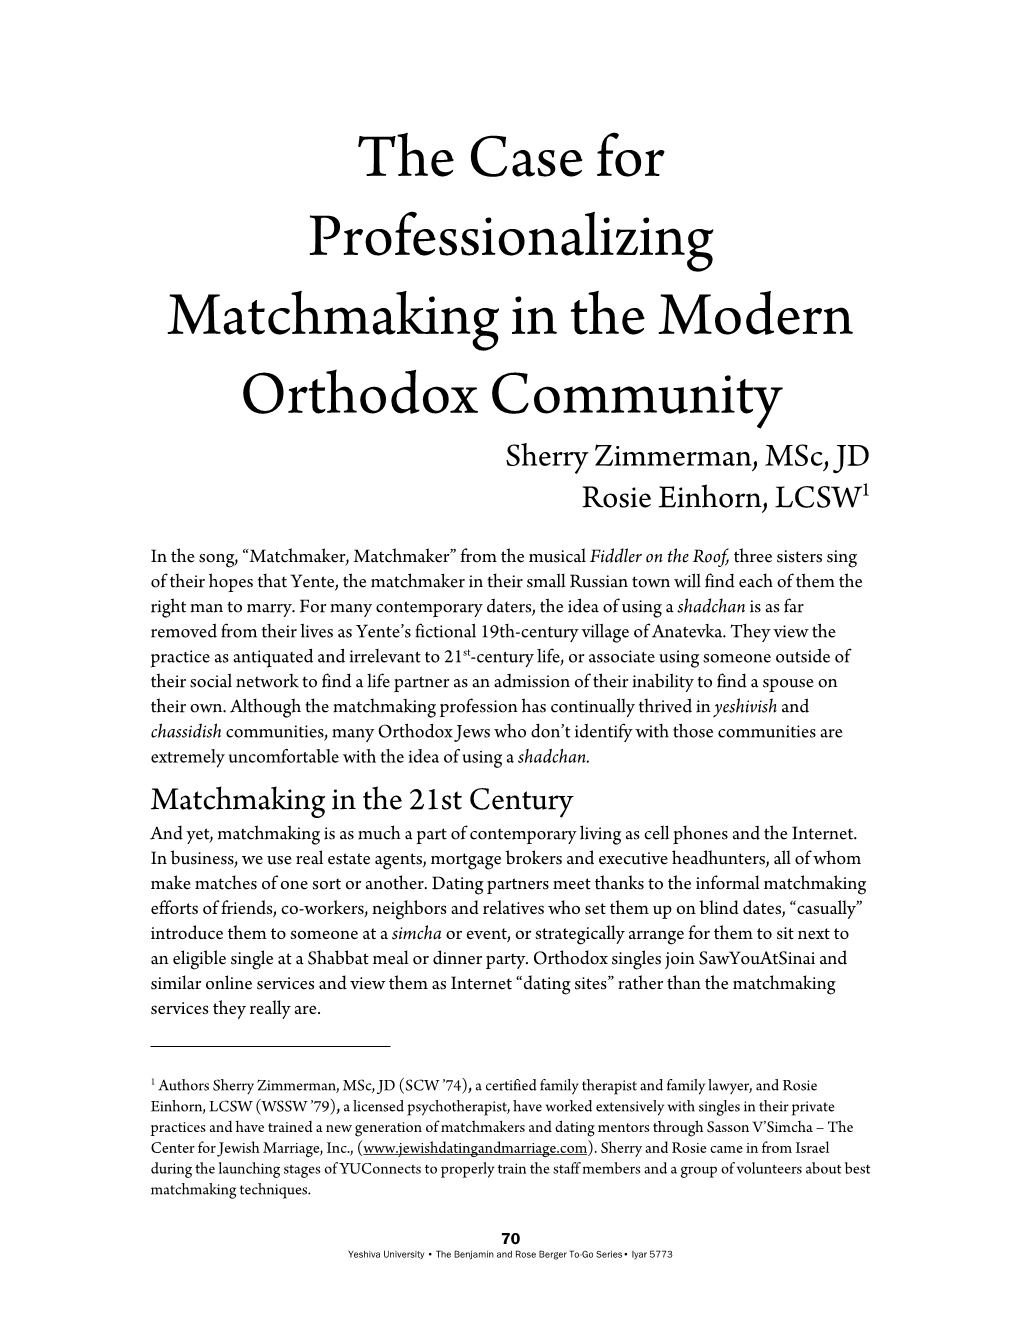 The Case for Professionalizing Matchmaking in the Modern Orthodox Community Sherry Zimmerman, Msc, JD Rosie Einhorn, LCSW1